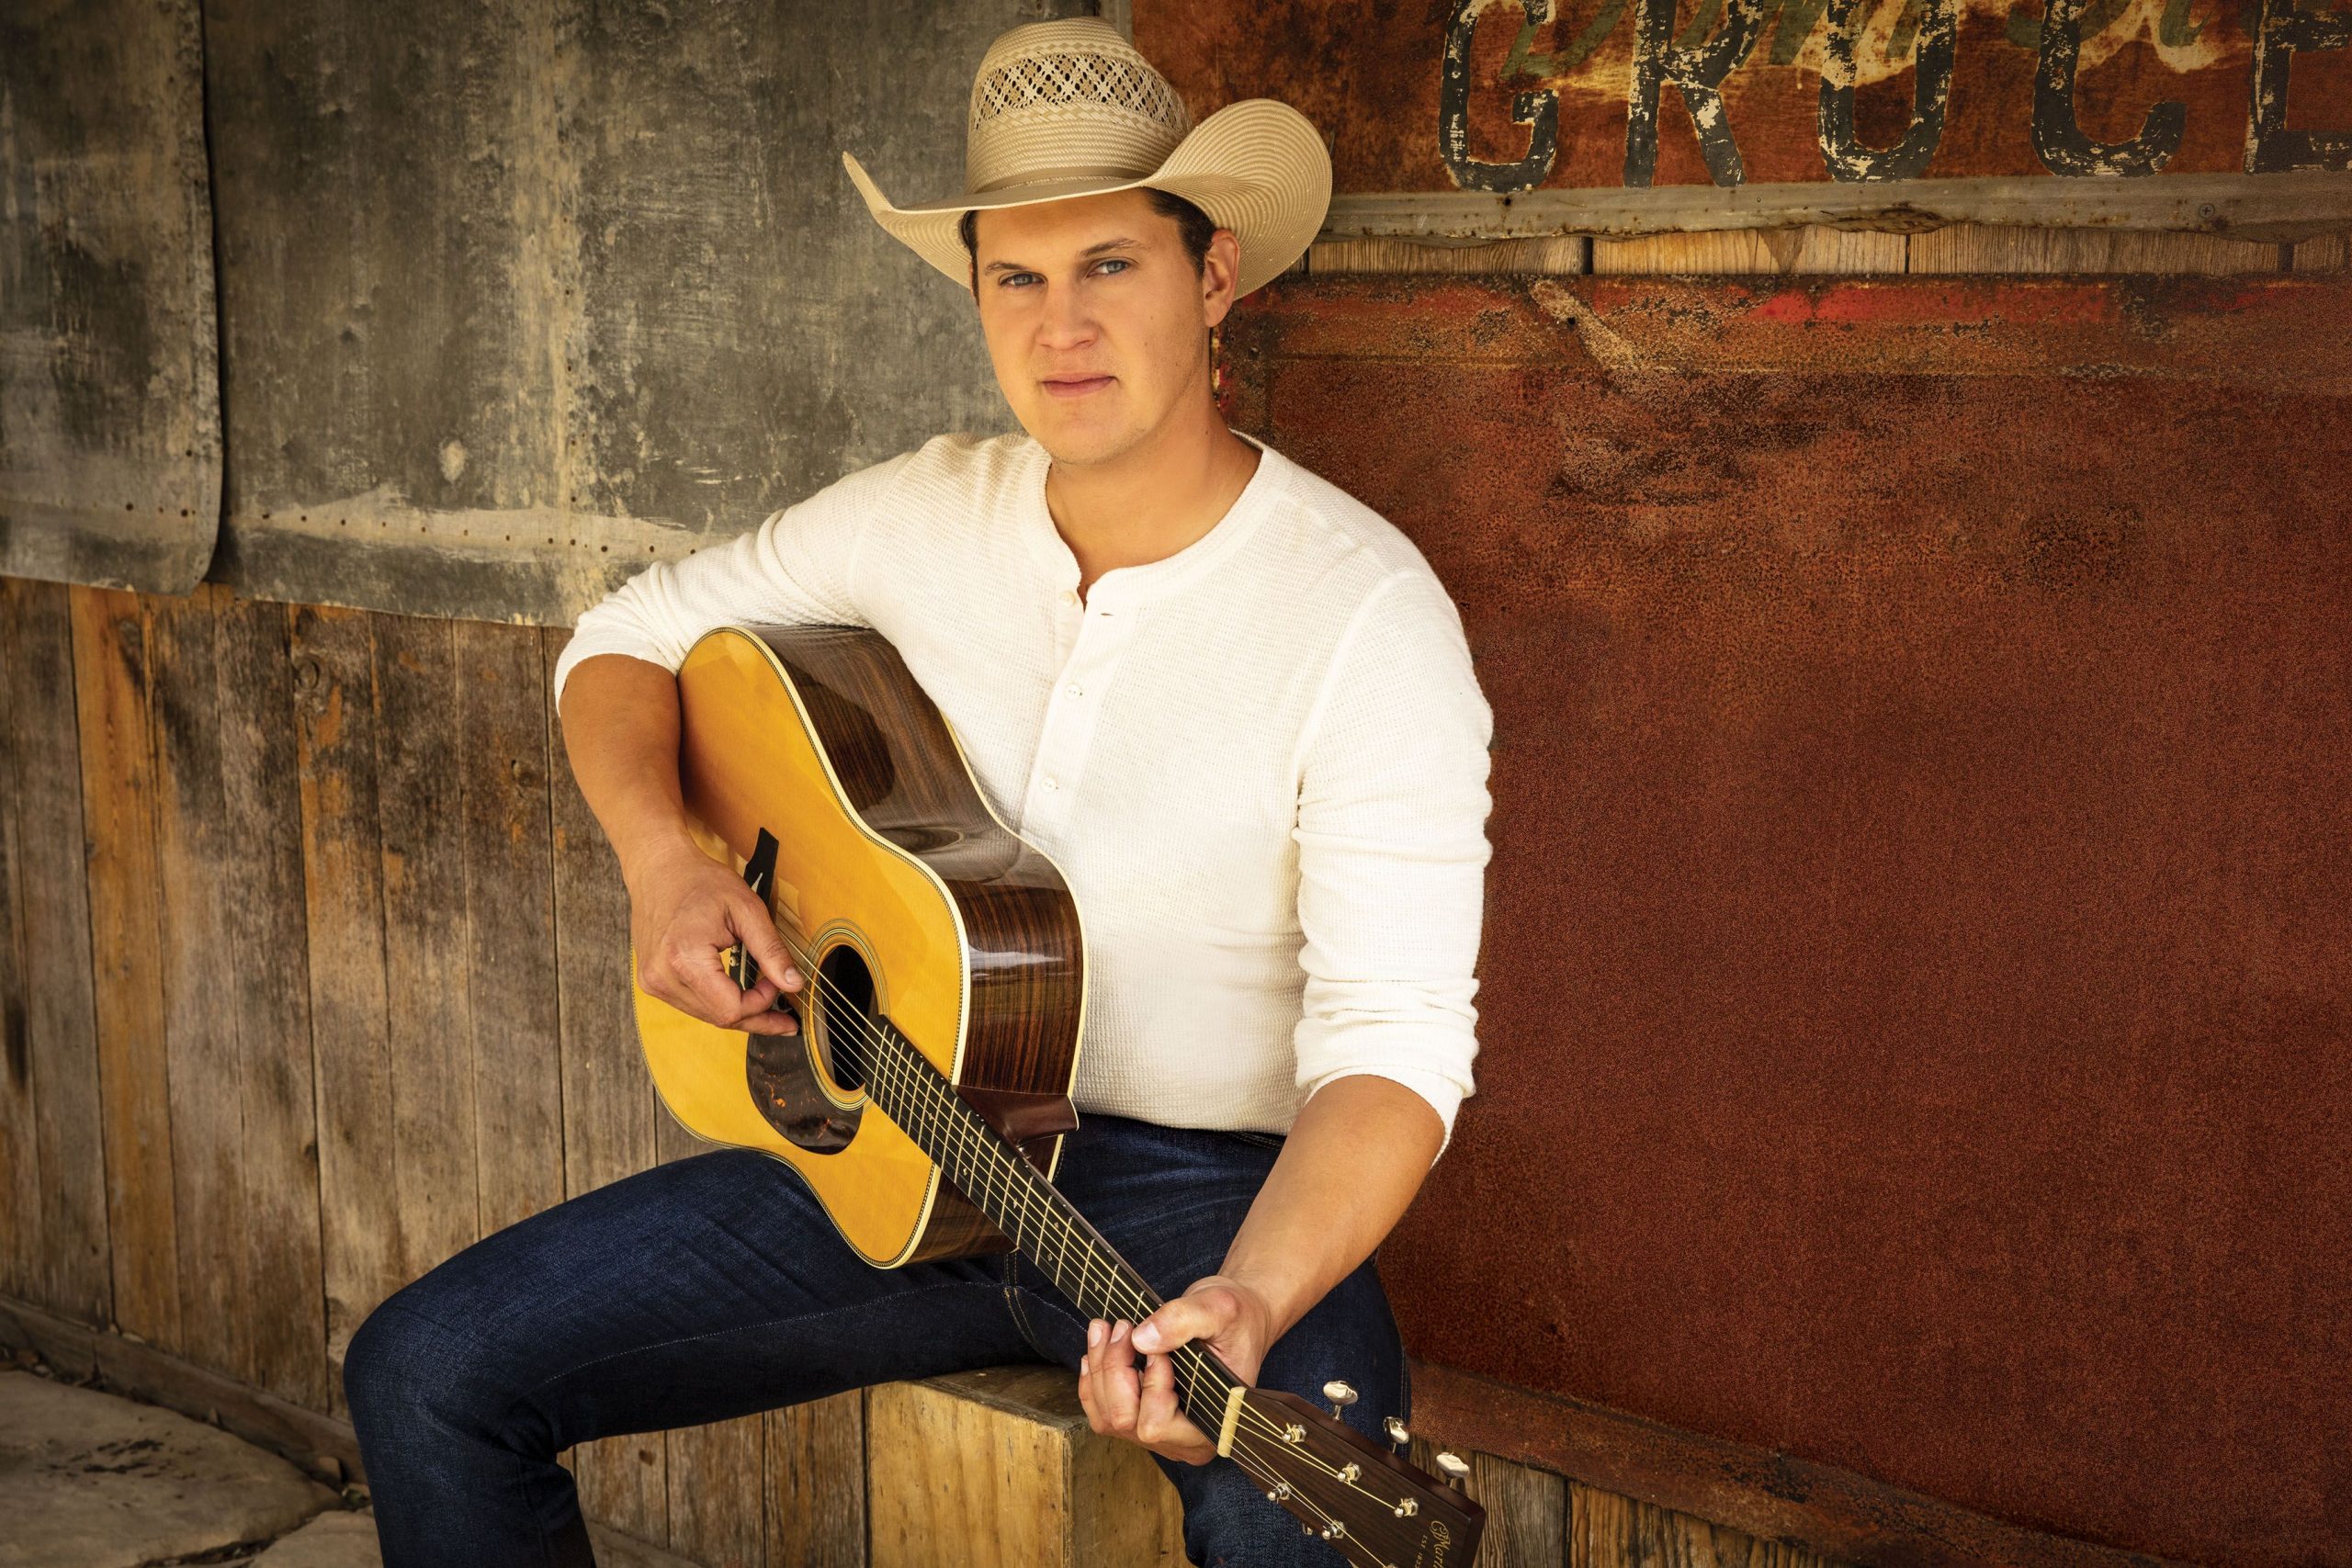 JON PARDI’S “TEQUILA LITTLE TIME” ARRIVES IN TIME FOR CINCO DE MAYO